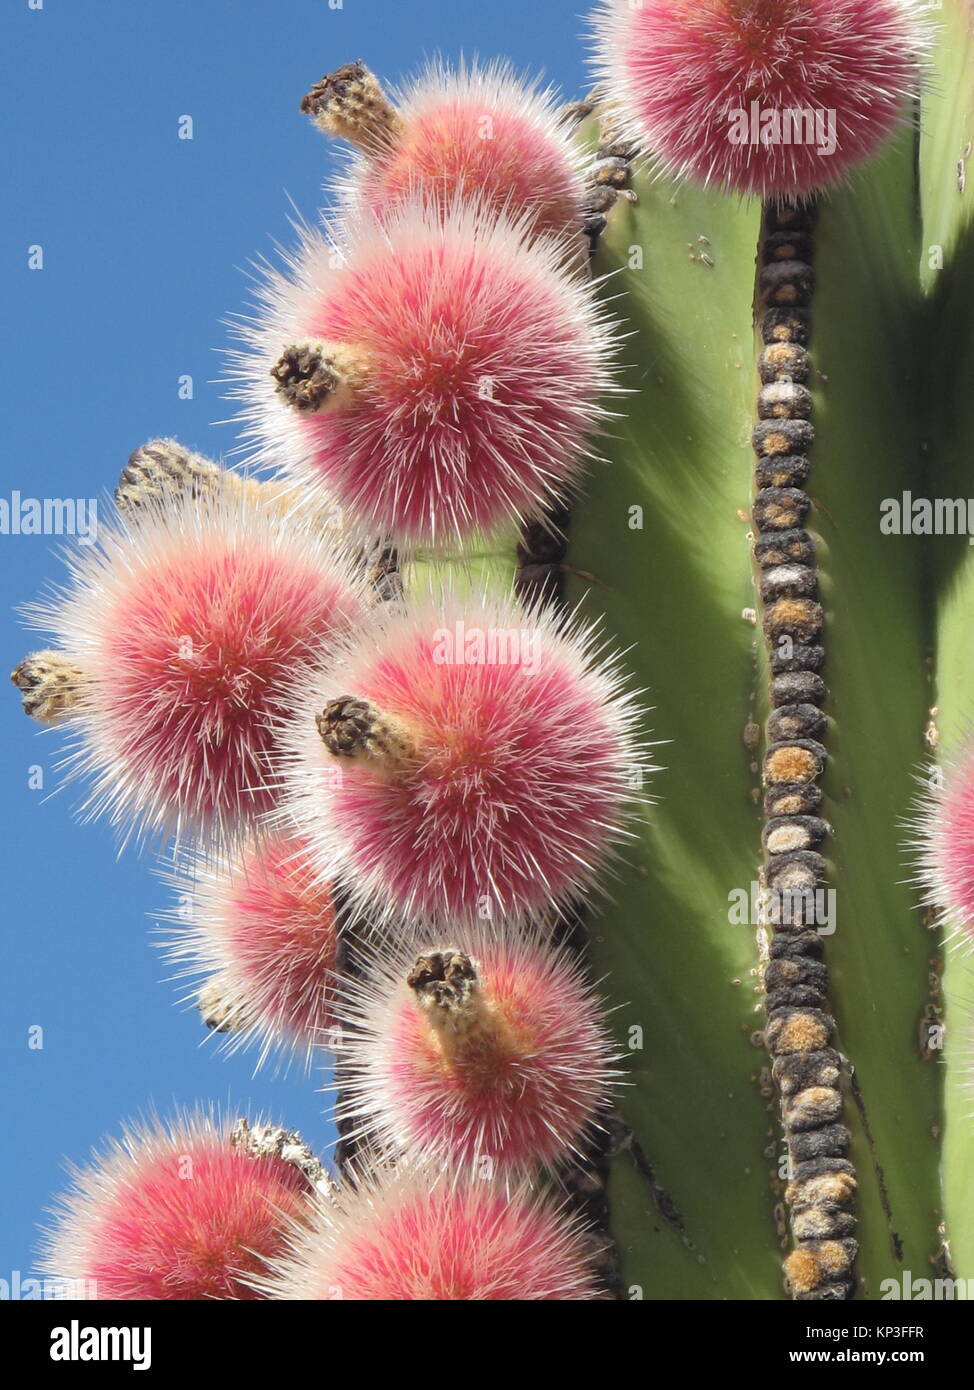 Cactus and flowering plant Stock Photo